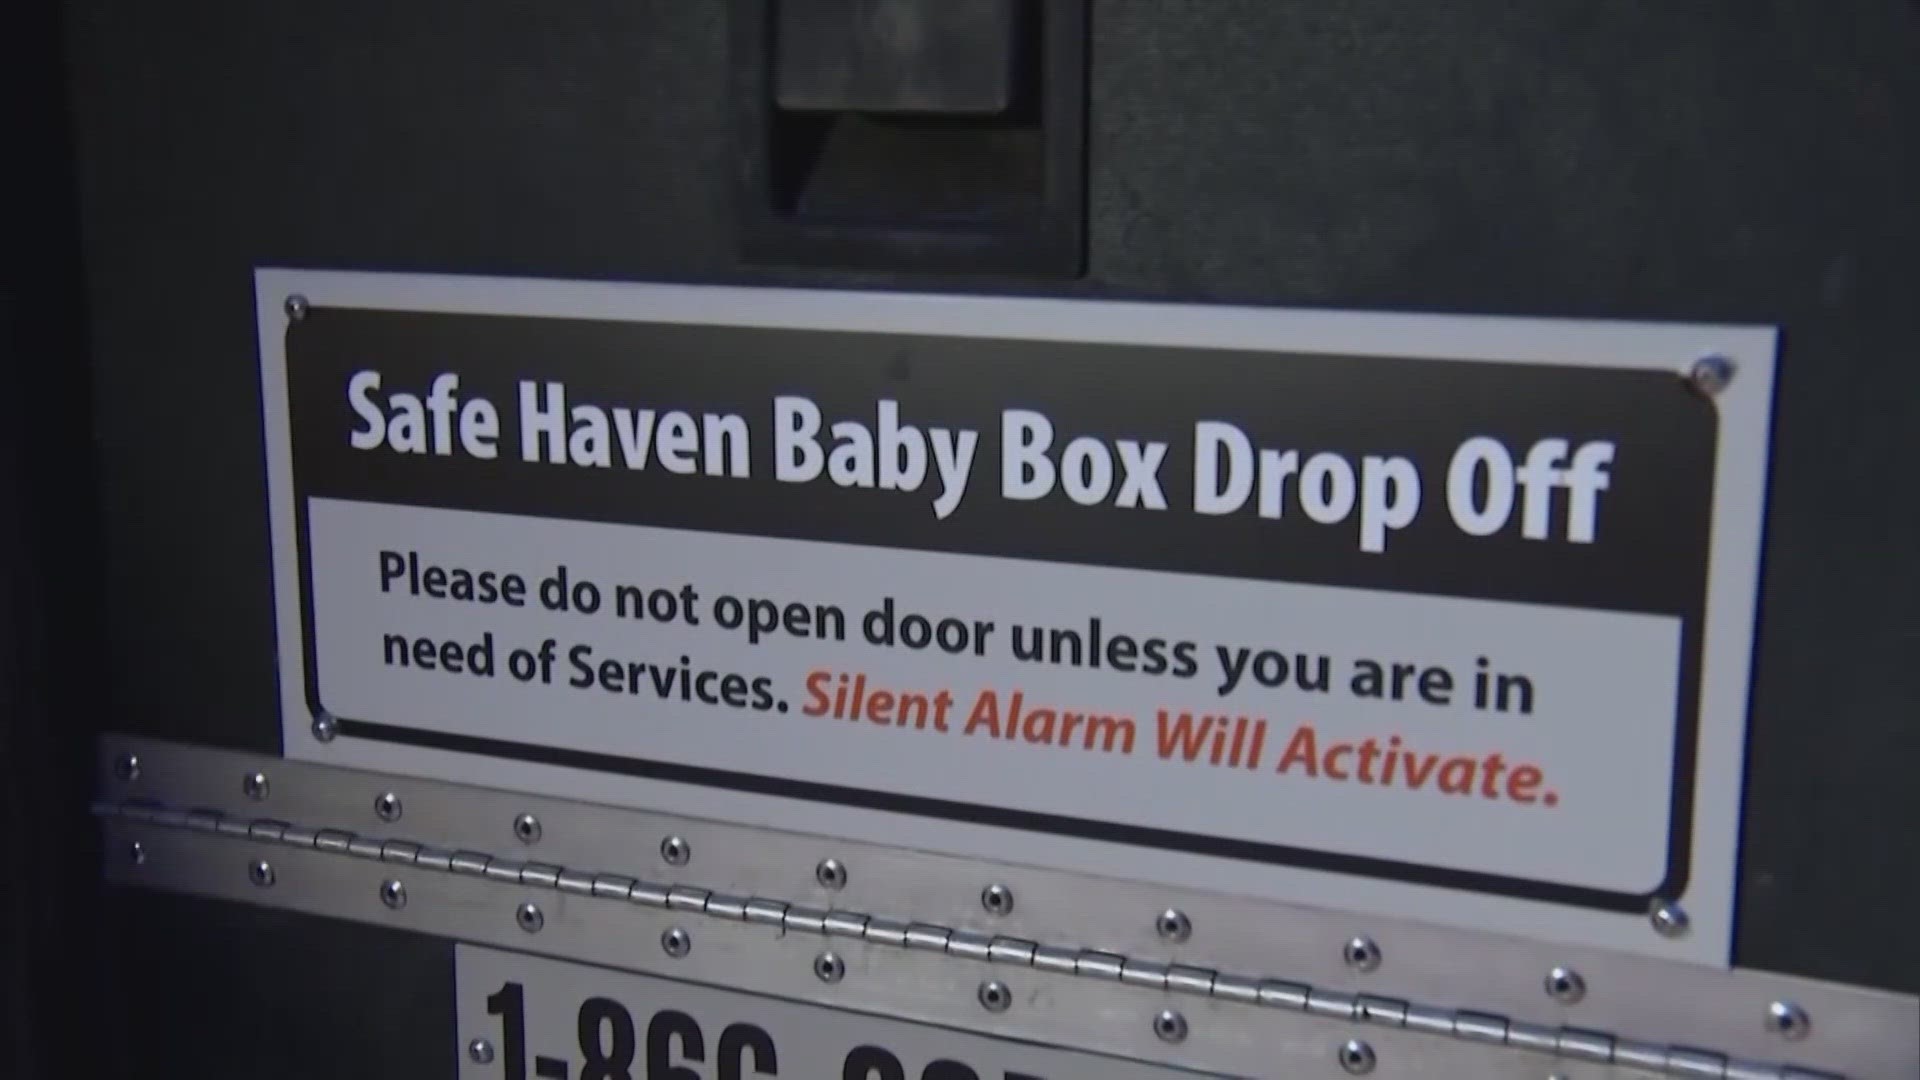 An expansion of the 'Baby Moses' law will take effect soon, allowing parents to drop off infants anonymously. Baby boxes will be installed at local fire stations.